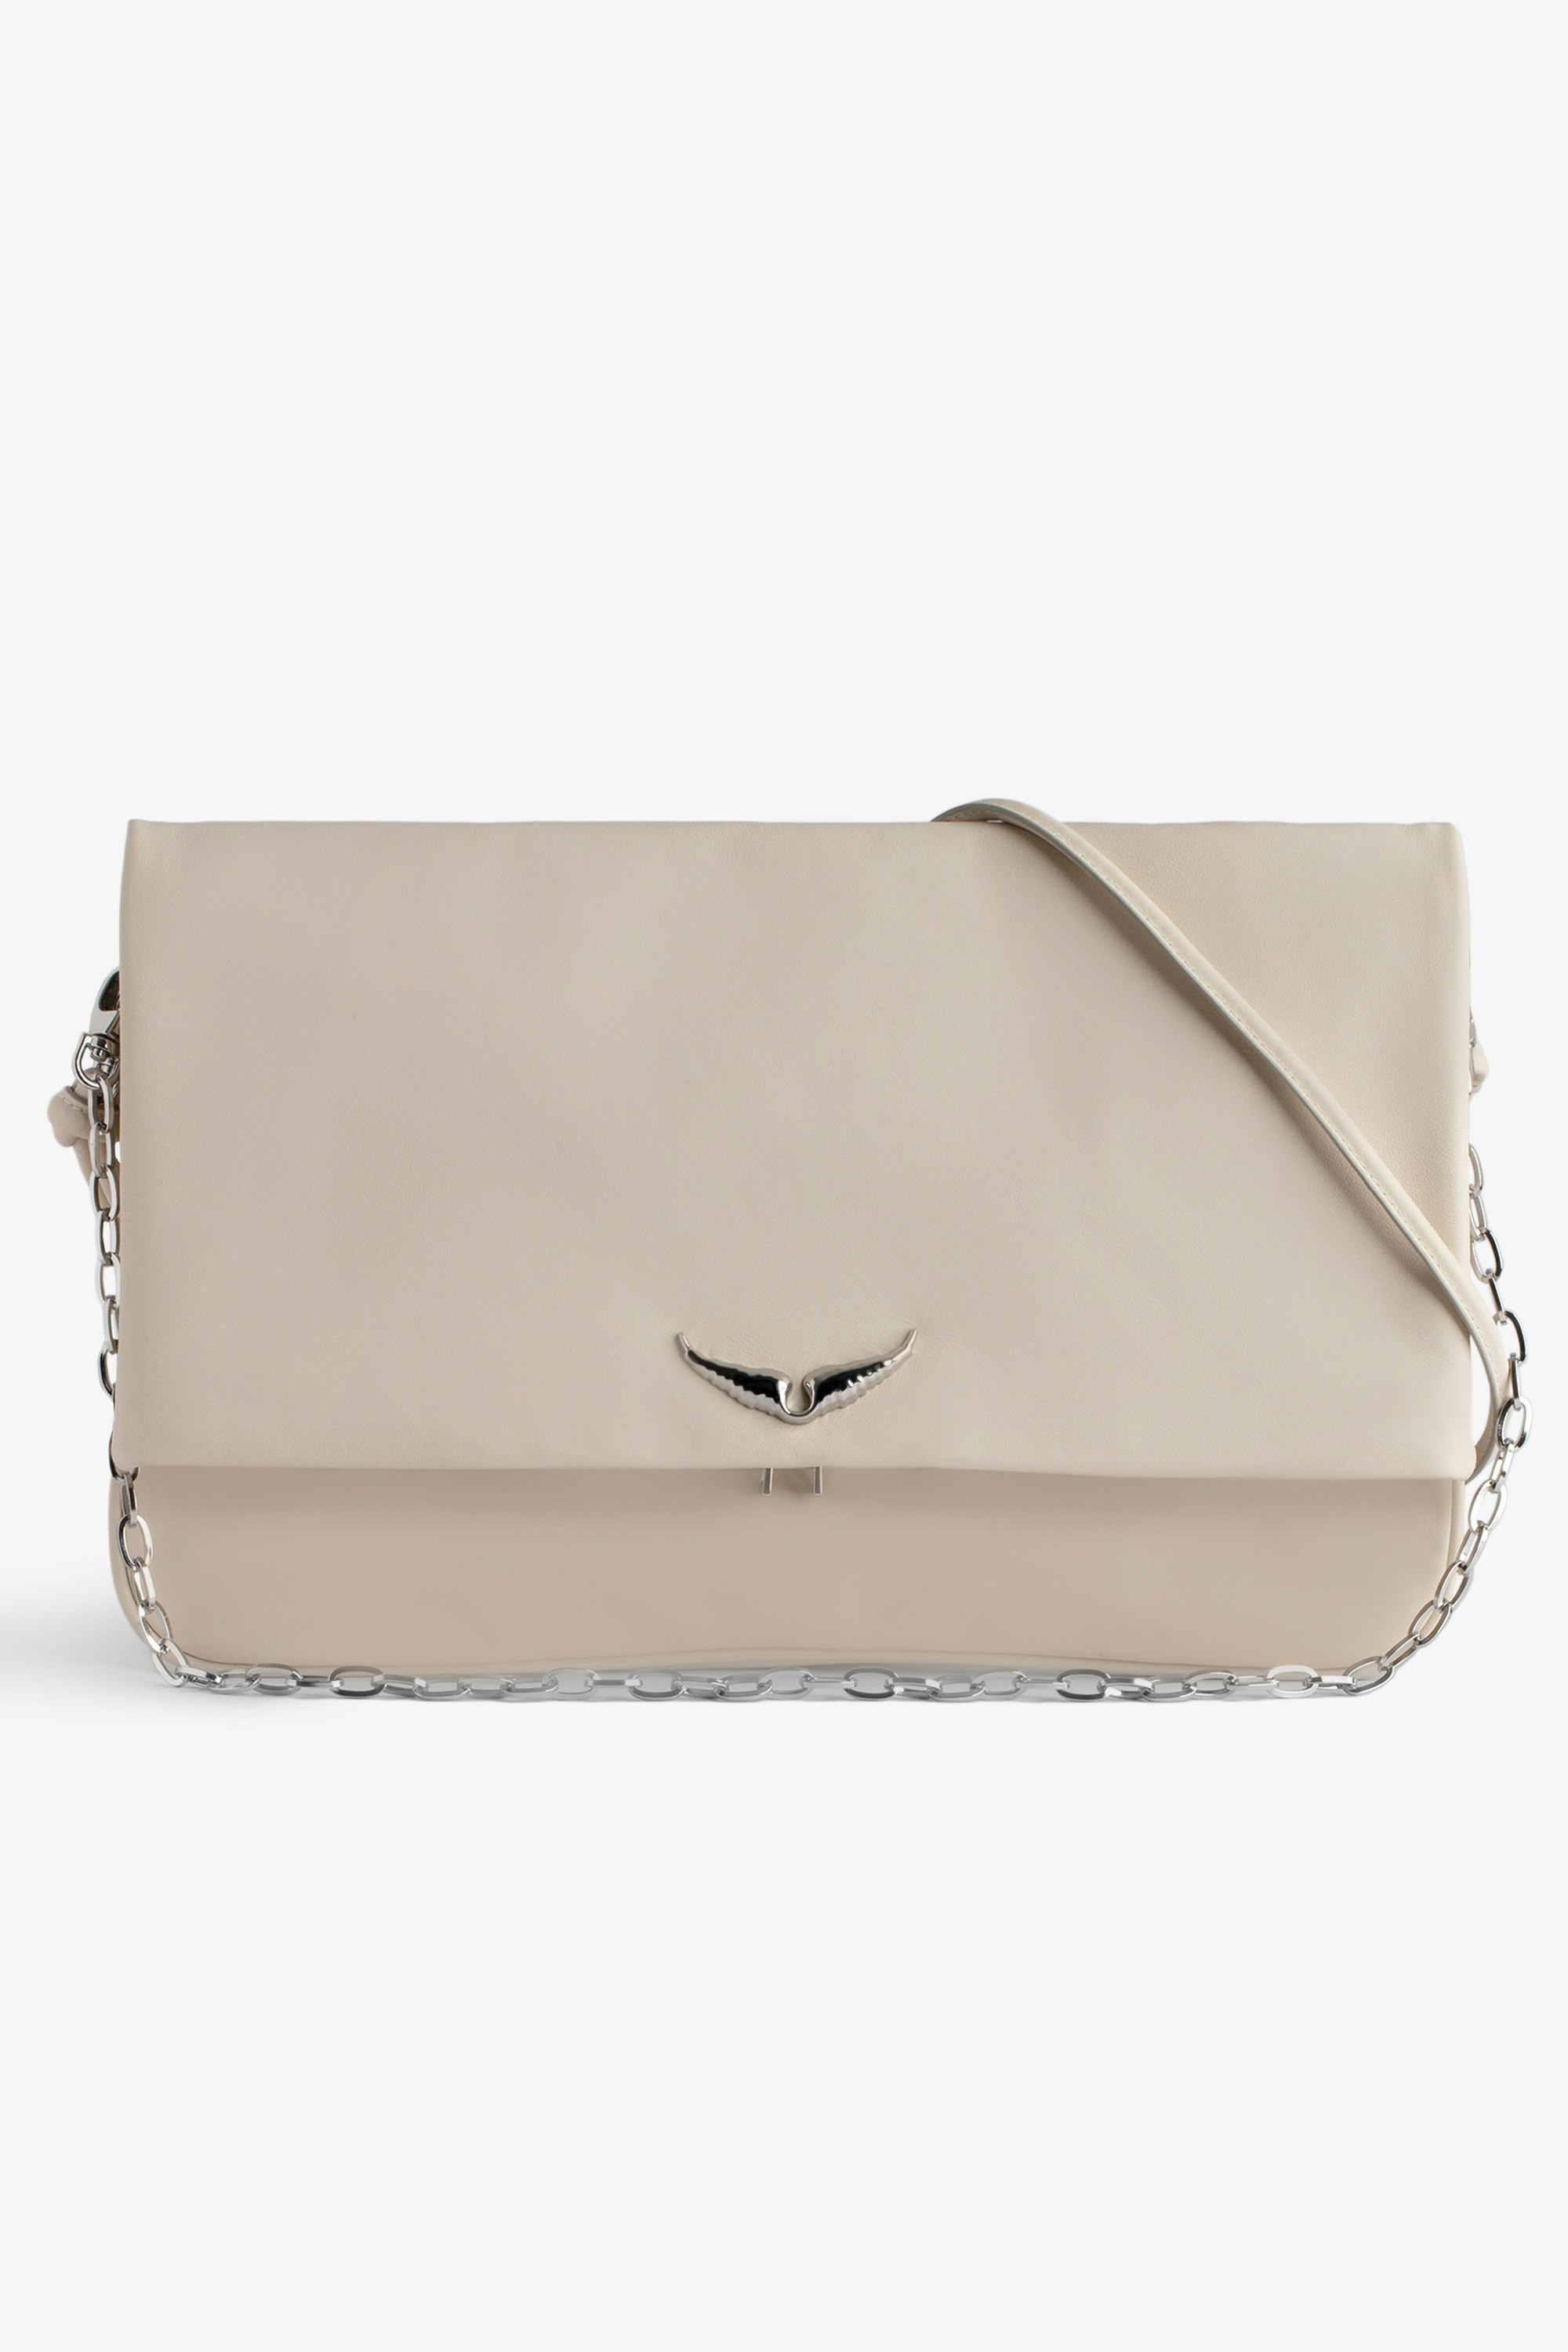 Rock Eternal XL Clutch - Rock ecru smooth leather clutch with double leather and metal chain strap.